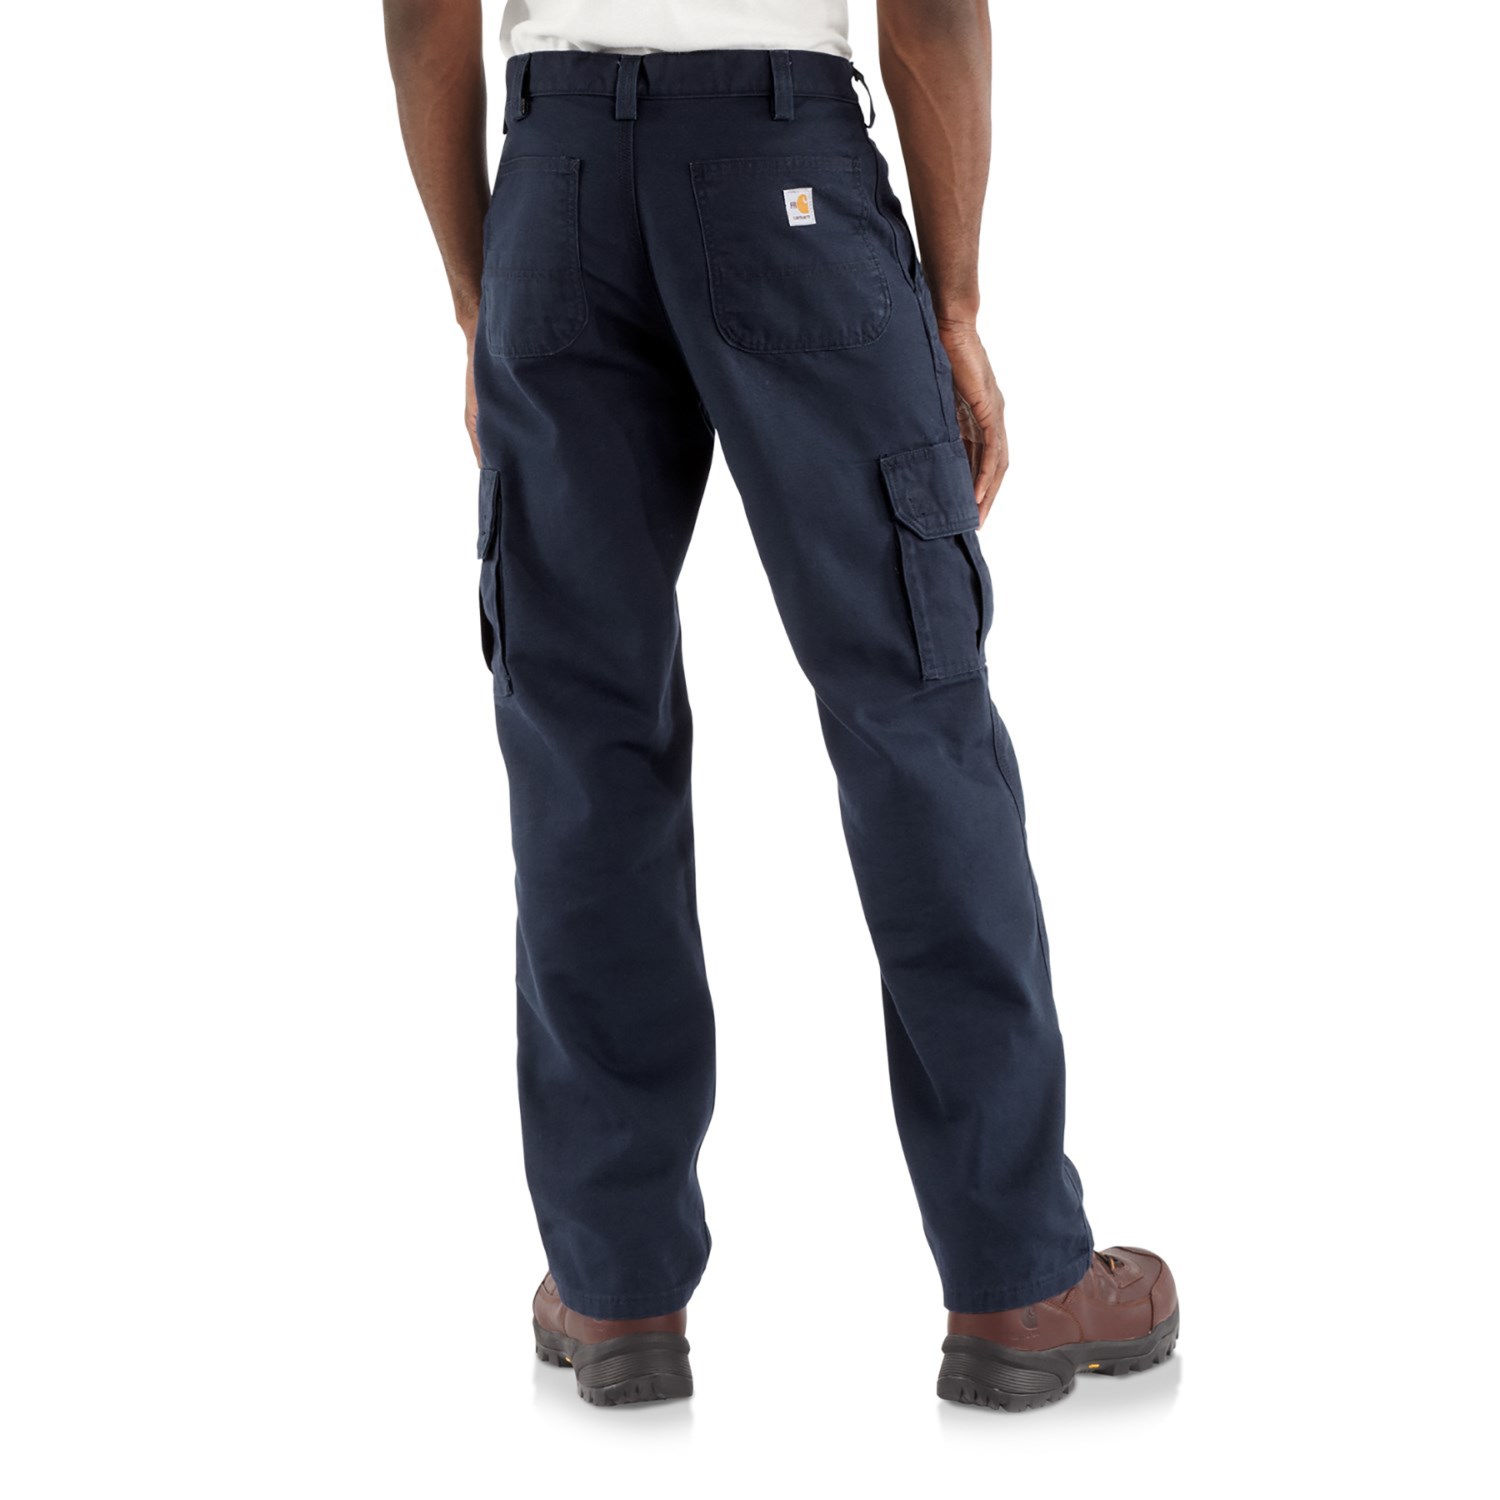 Carhartt Flame Resistant Canvas Cargo Pant in navy